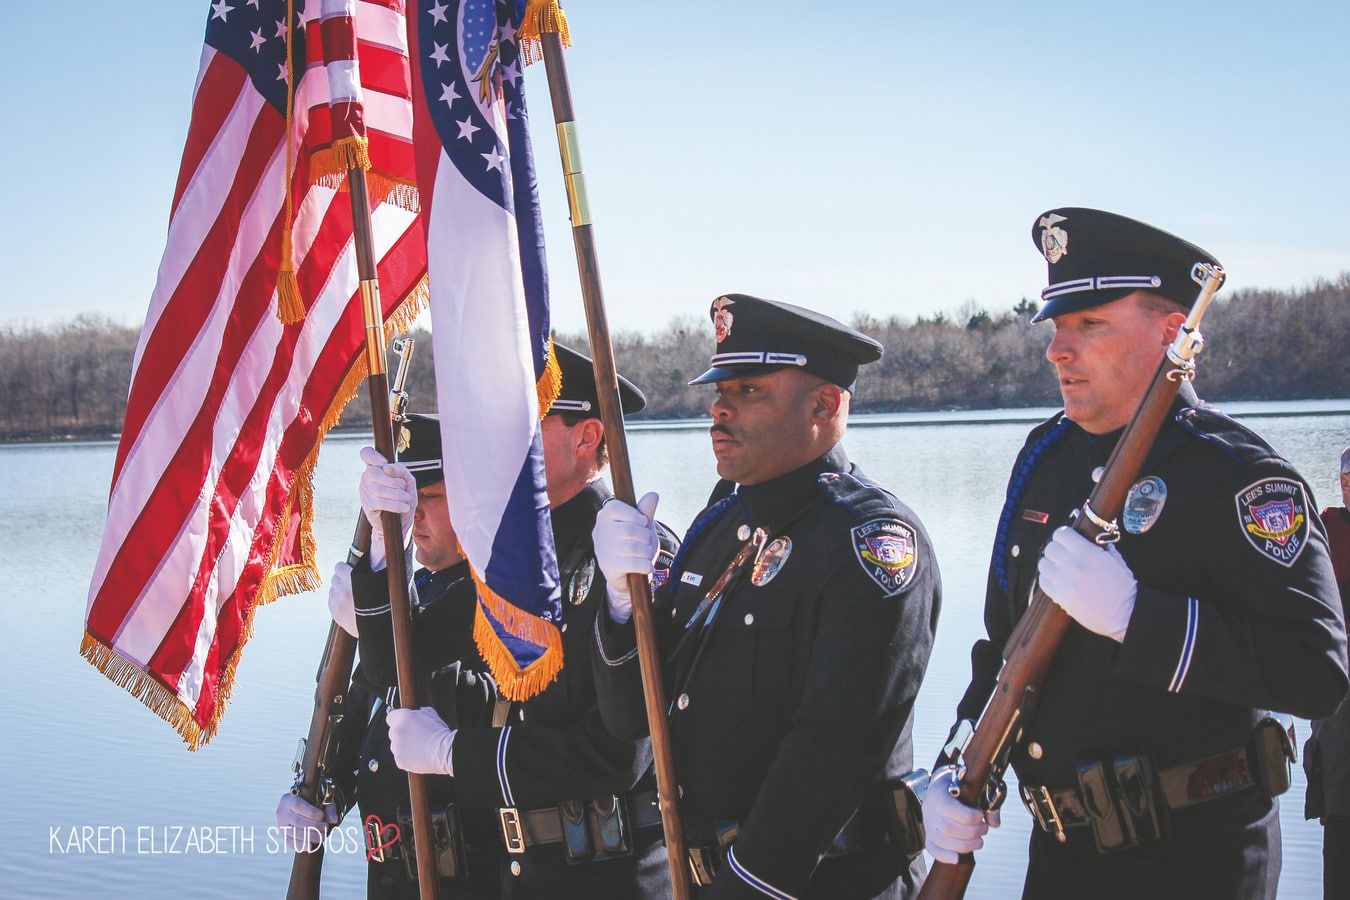 Police Officers pose while holding flags and rifles for opening ceremony at the Plunge